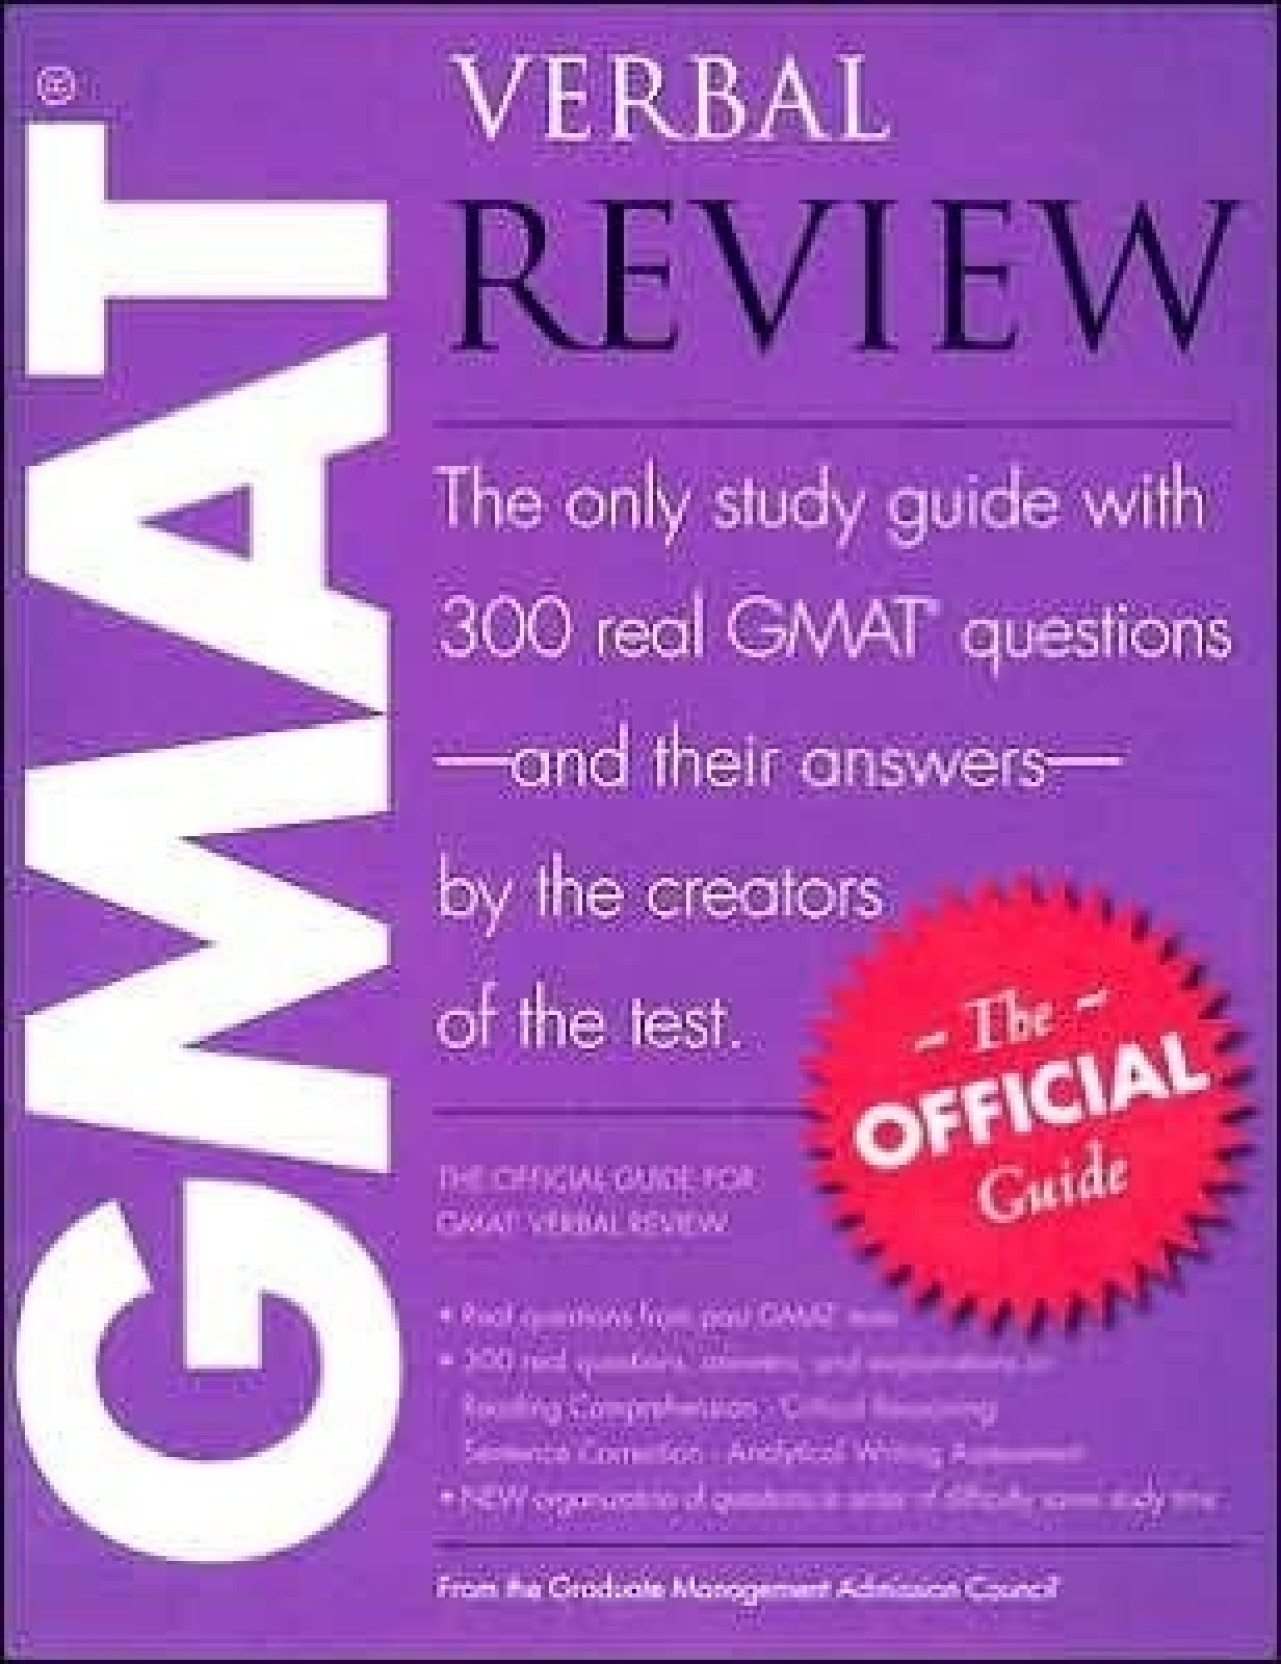 The Official Guide For GMAT Verbal Review